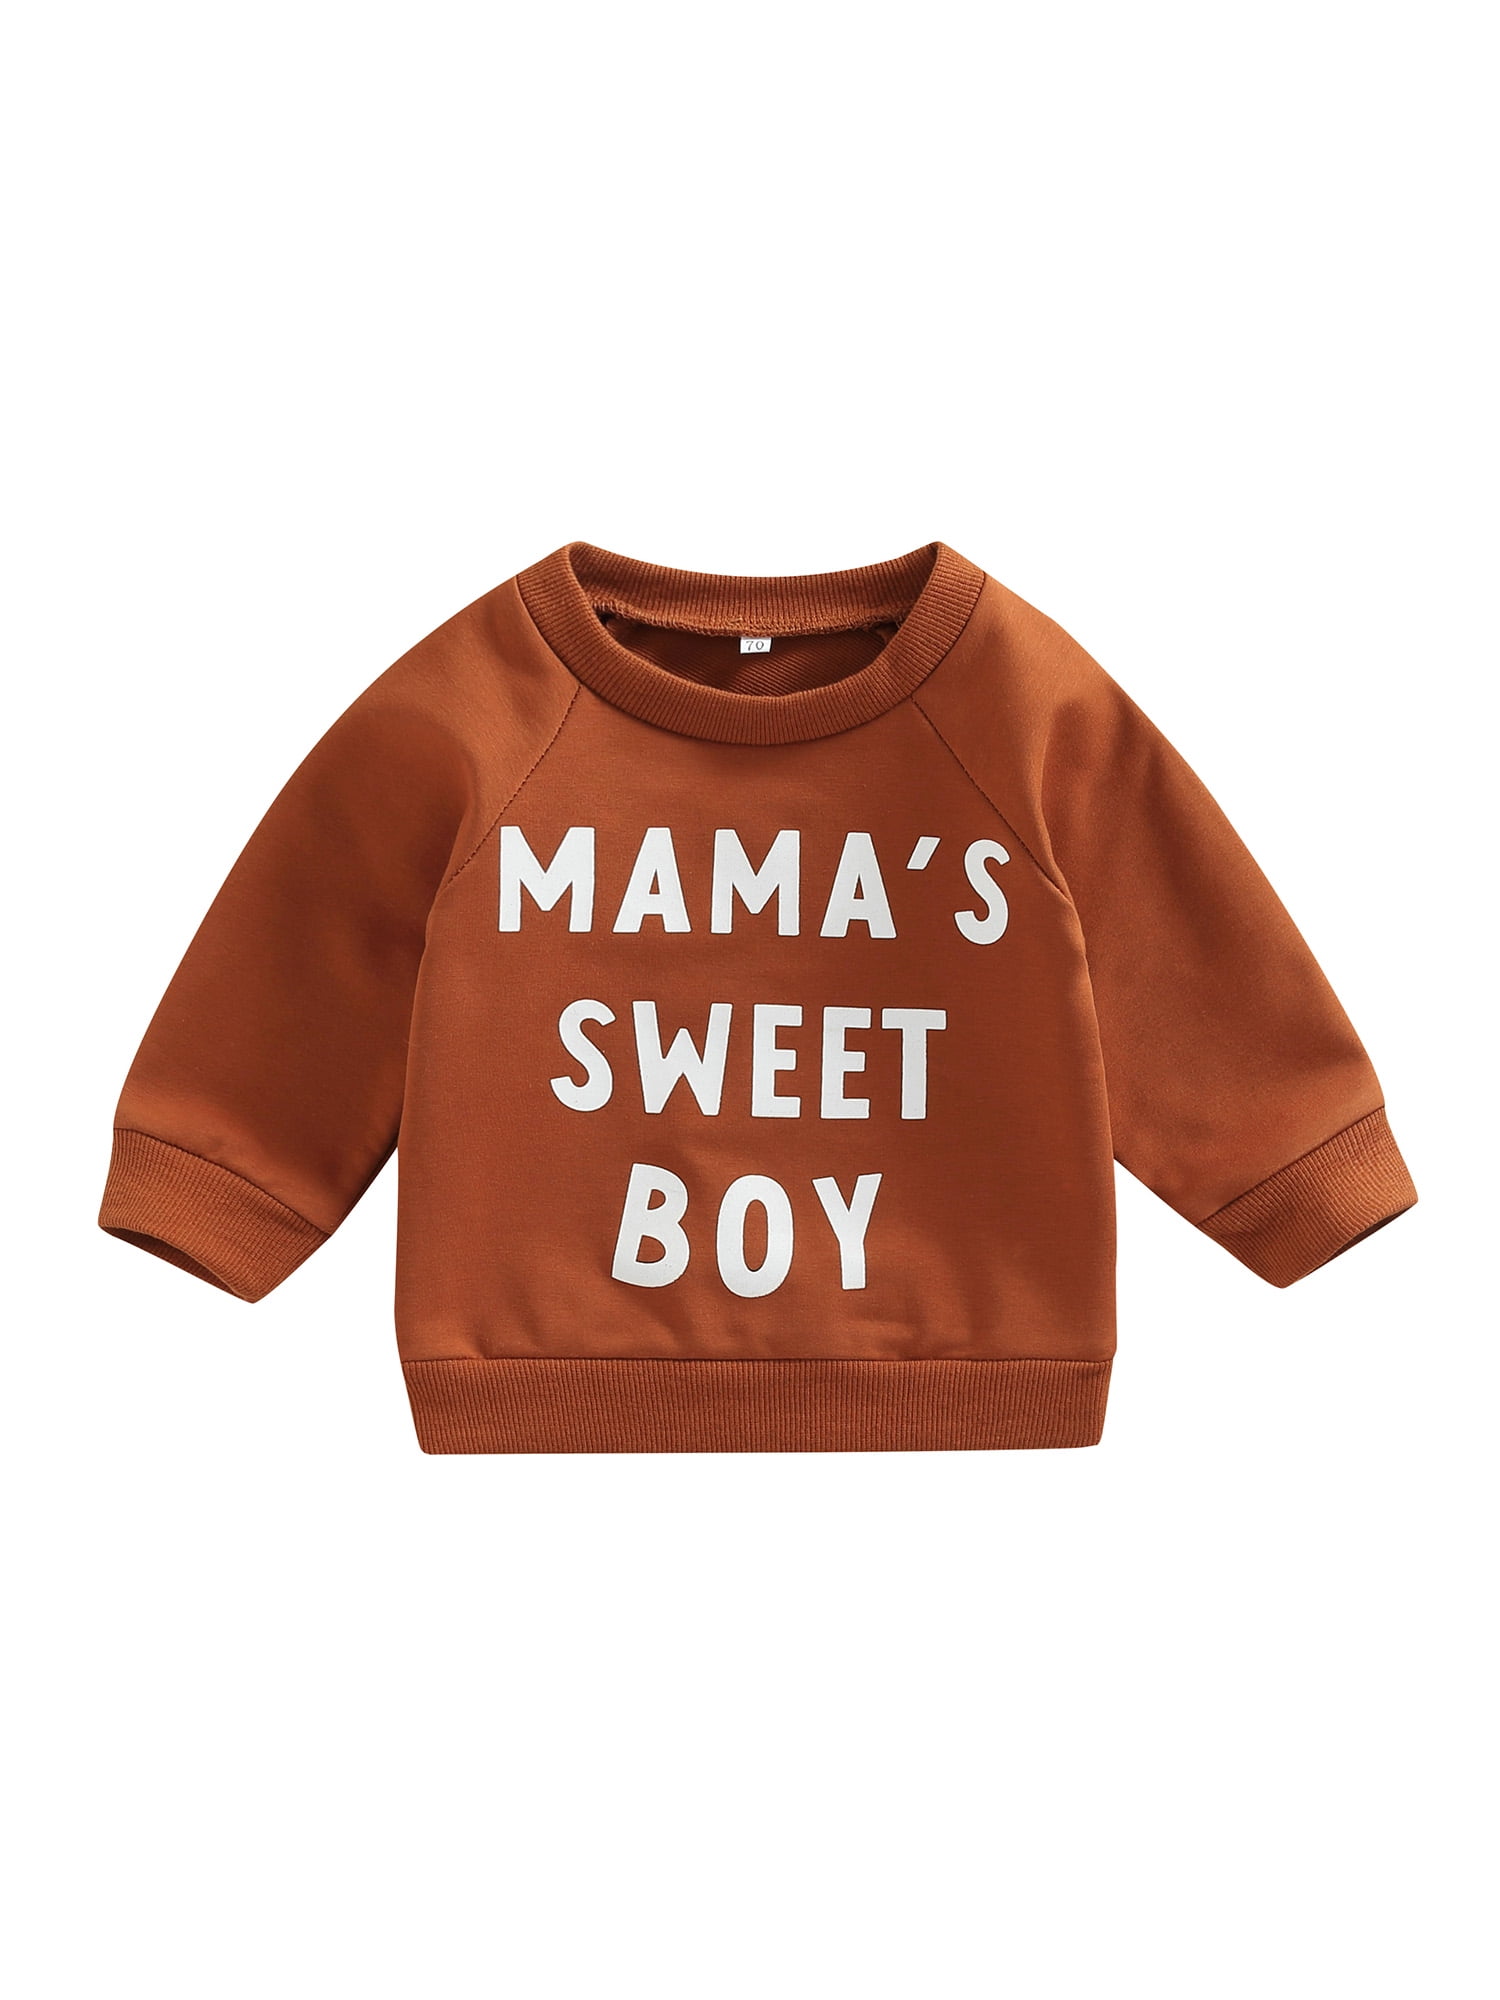 TheFound Newborn Infant Baby Boys Pullover Mama's Sweet Boy Sweatshirt Long  Sleeve Sweater Fall Clothes